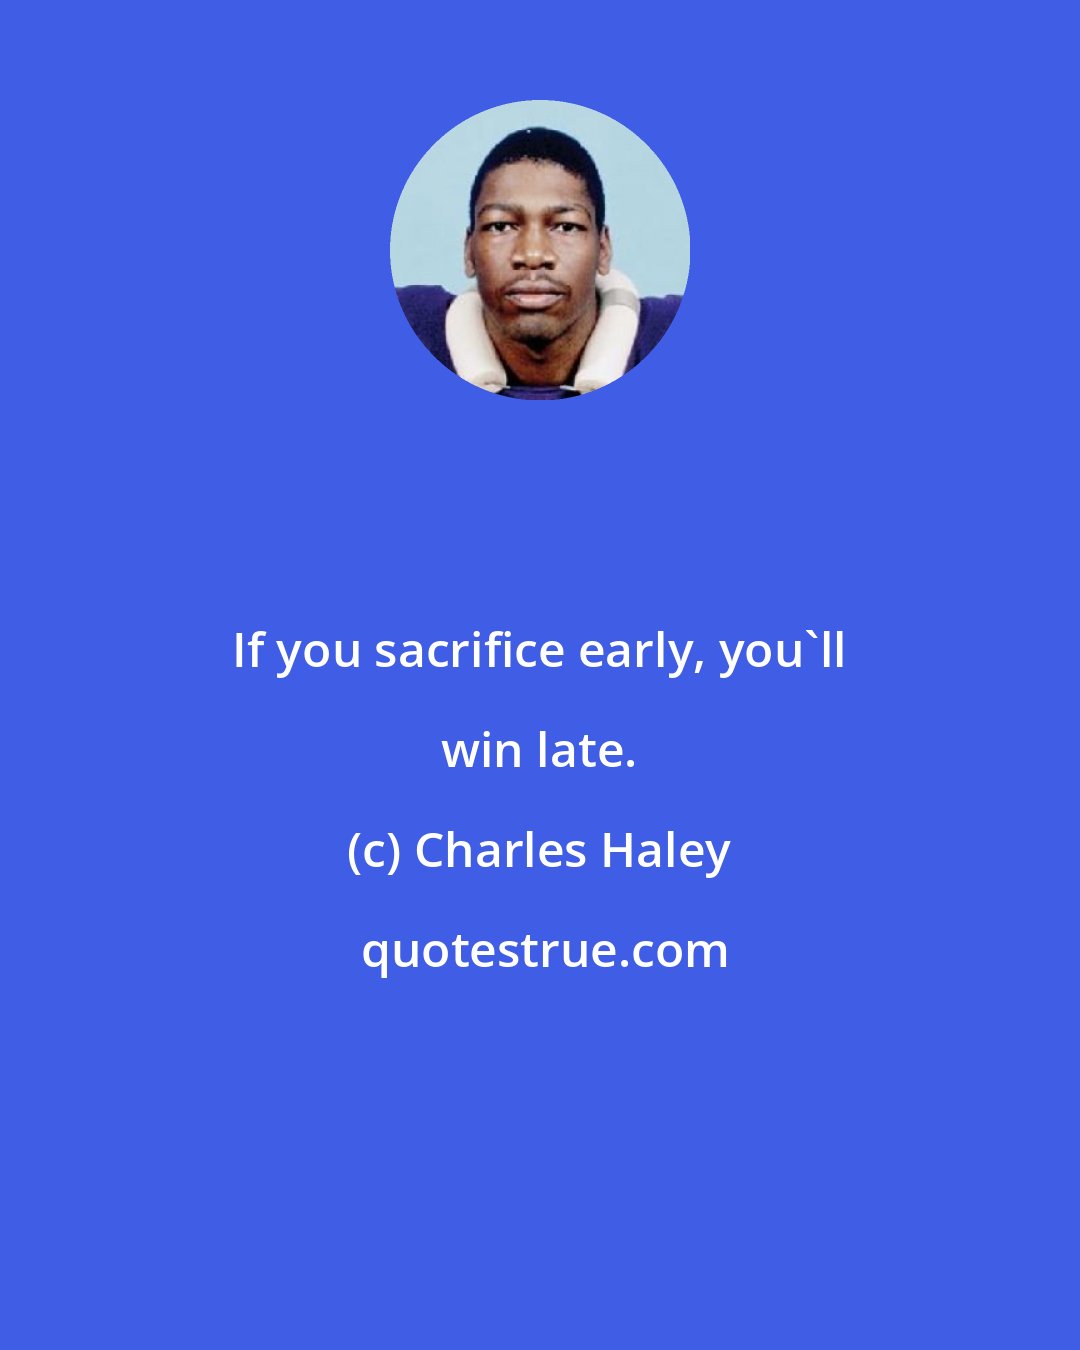 Charles Haley: If you sacrifice early, you'll win late.